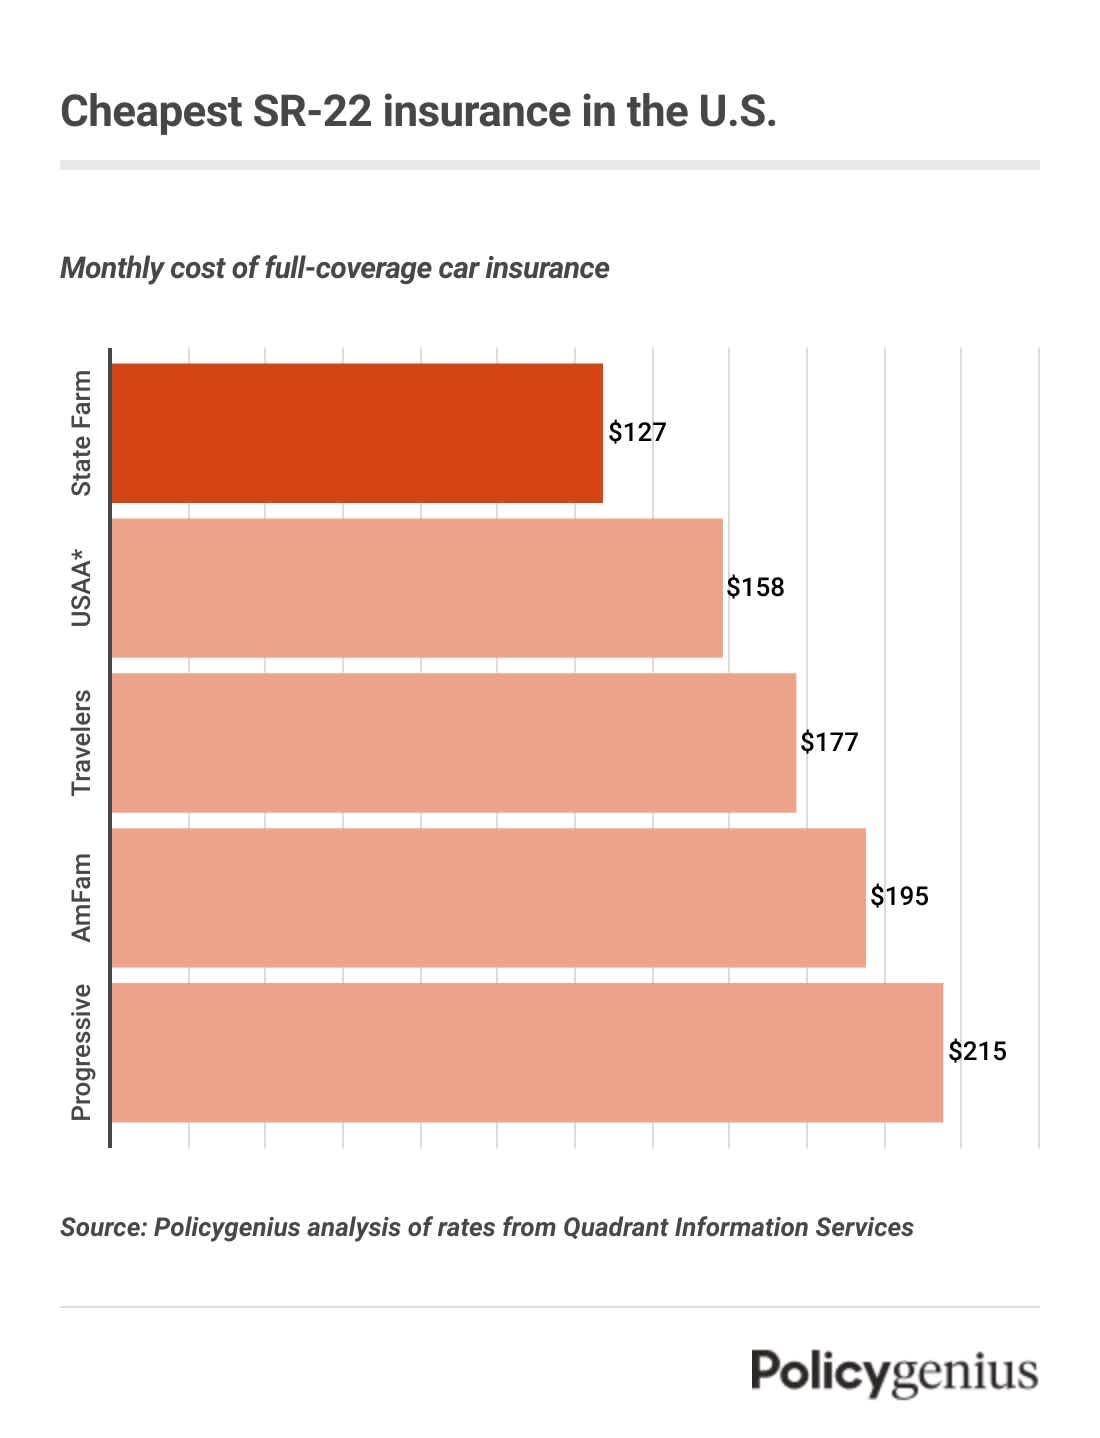 A graph showing the cheapest car insurance after an SR-22. State Farm is the cheapest company.